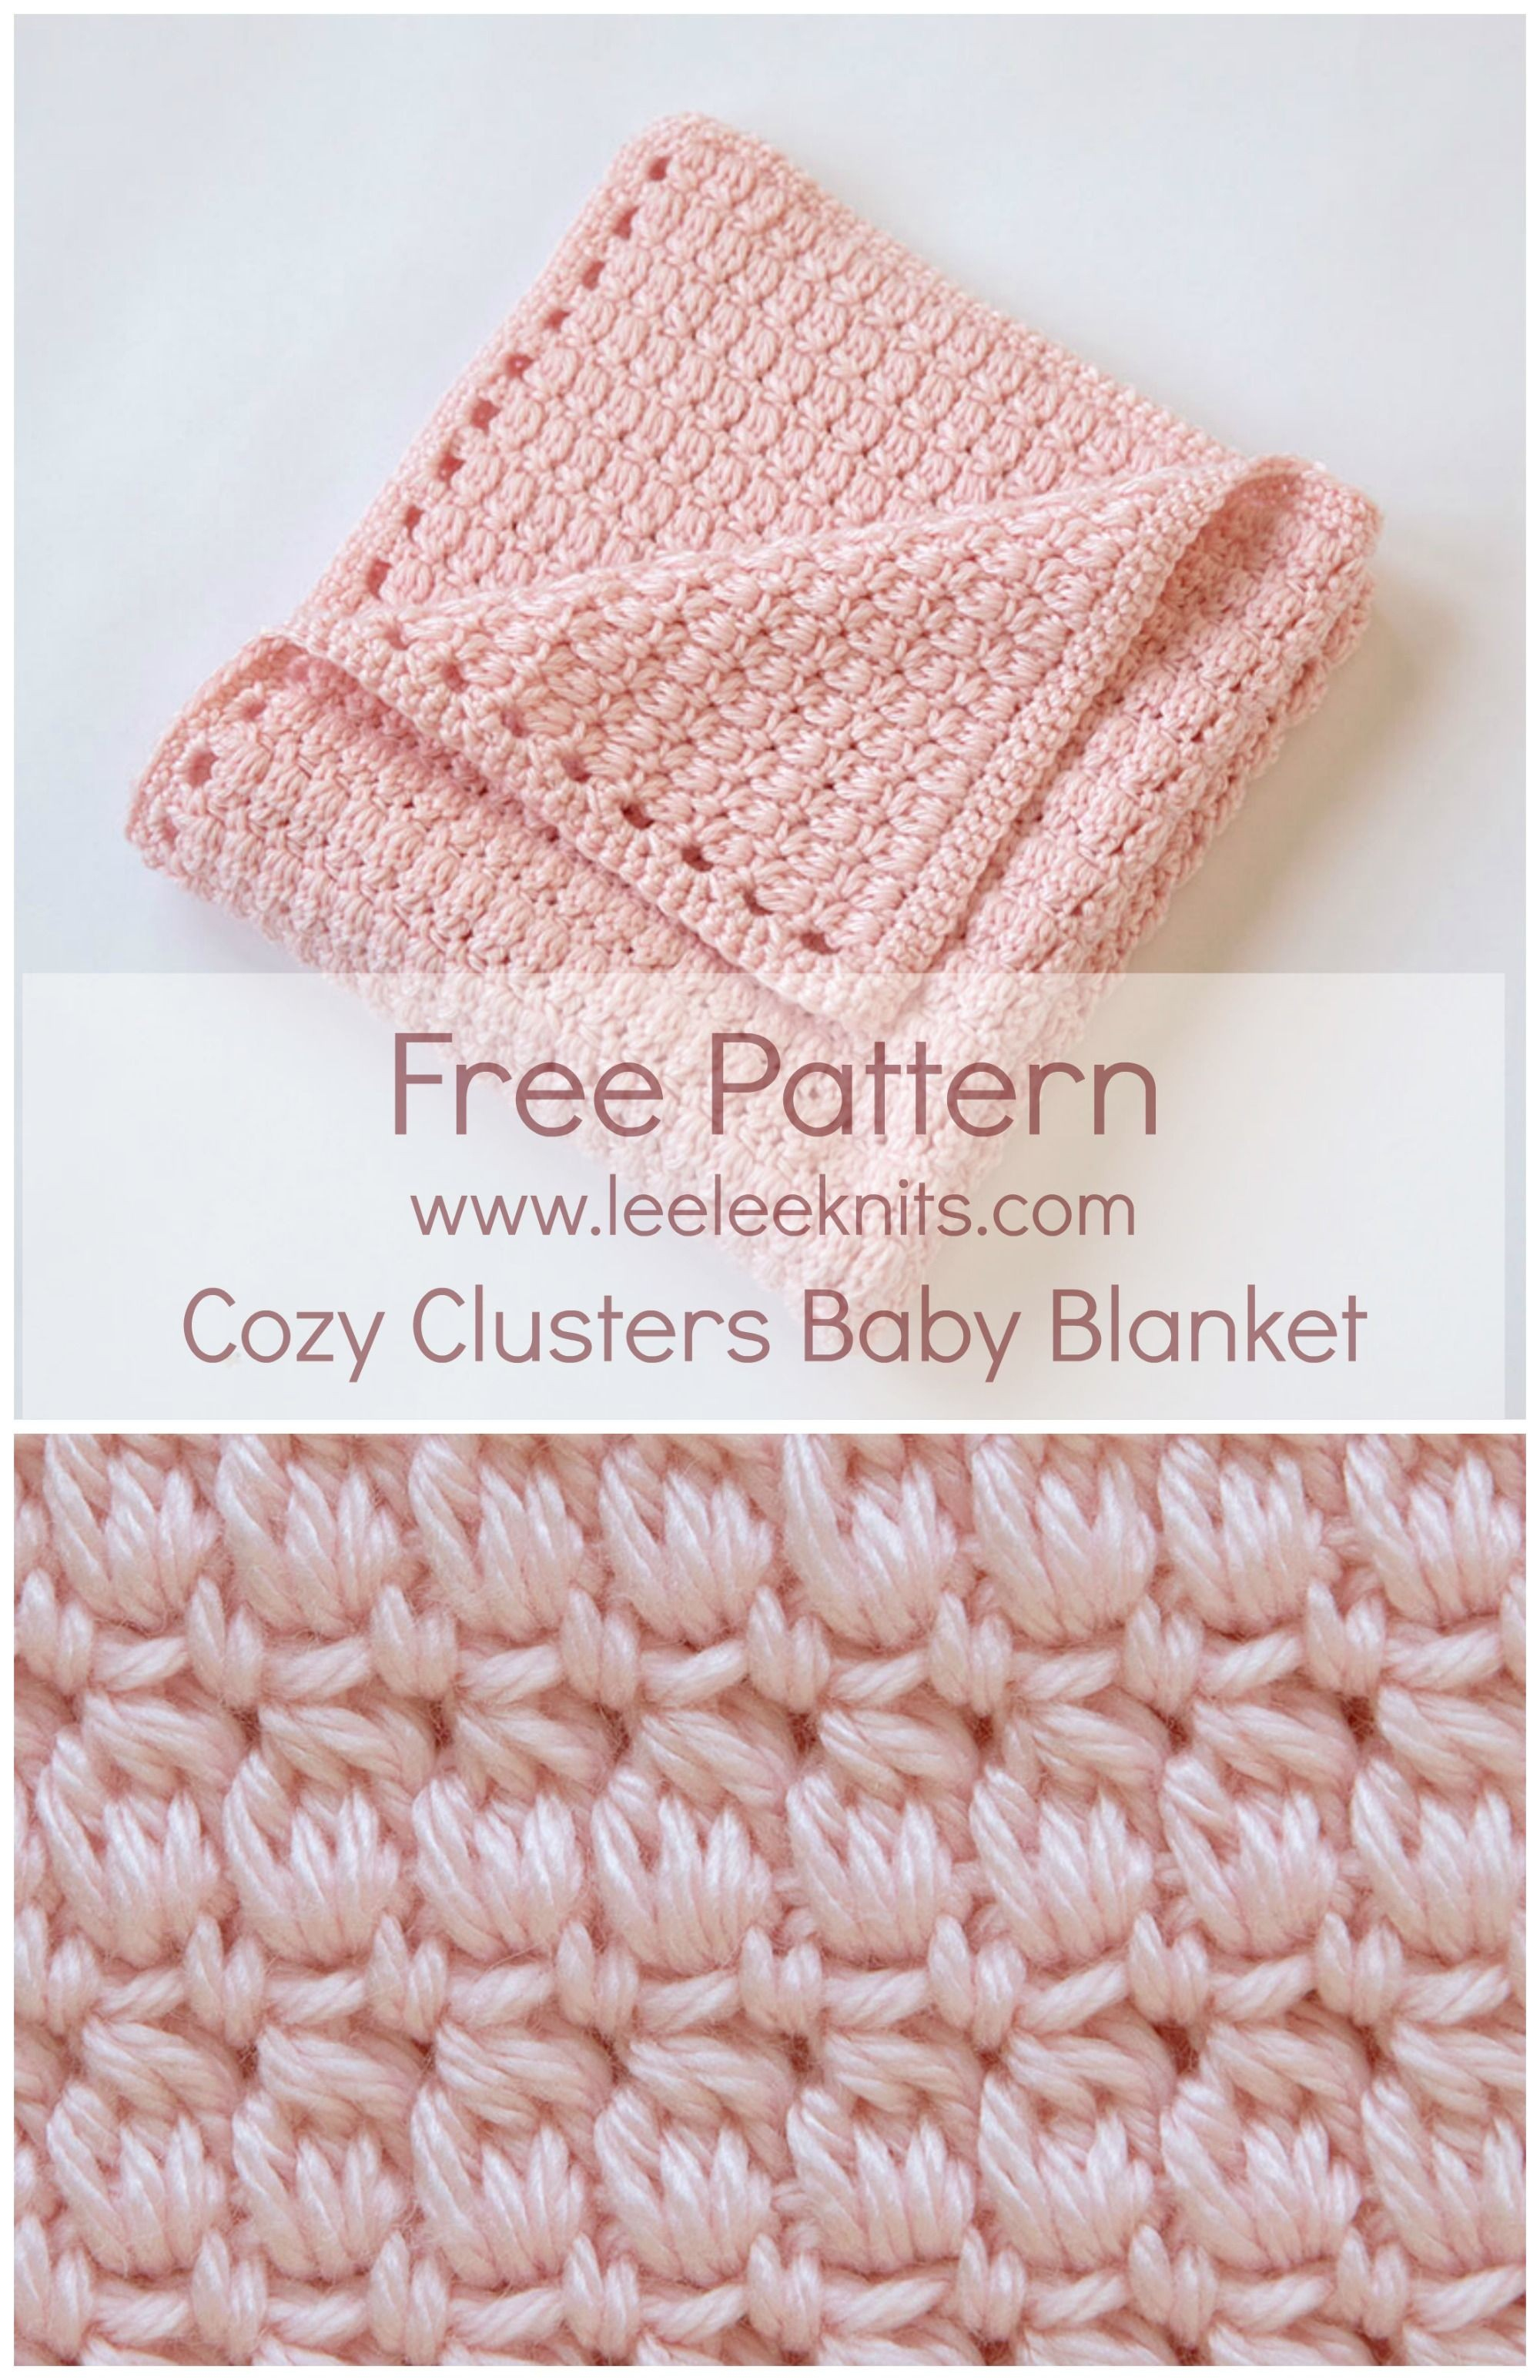 Easy Baby Crochet Blanket Pattern Crocheted Ba Blankets Patterns Free Quick Easy And Very Pretty